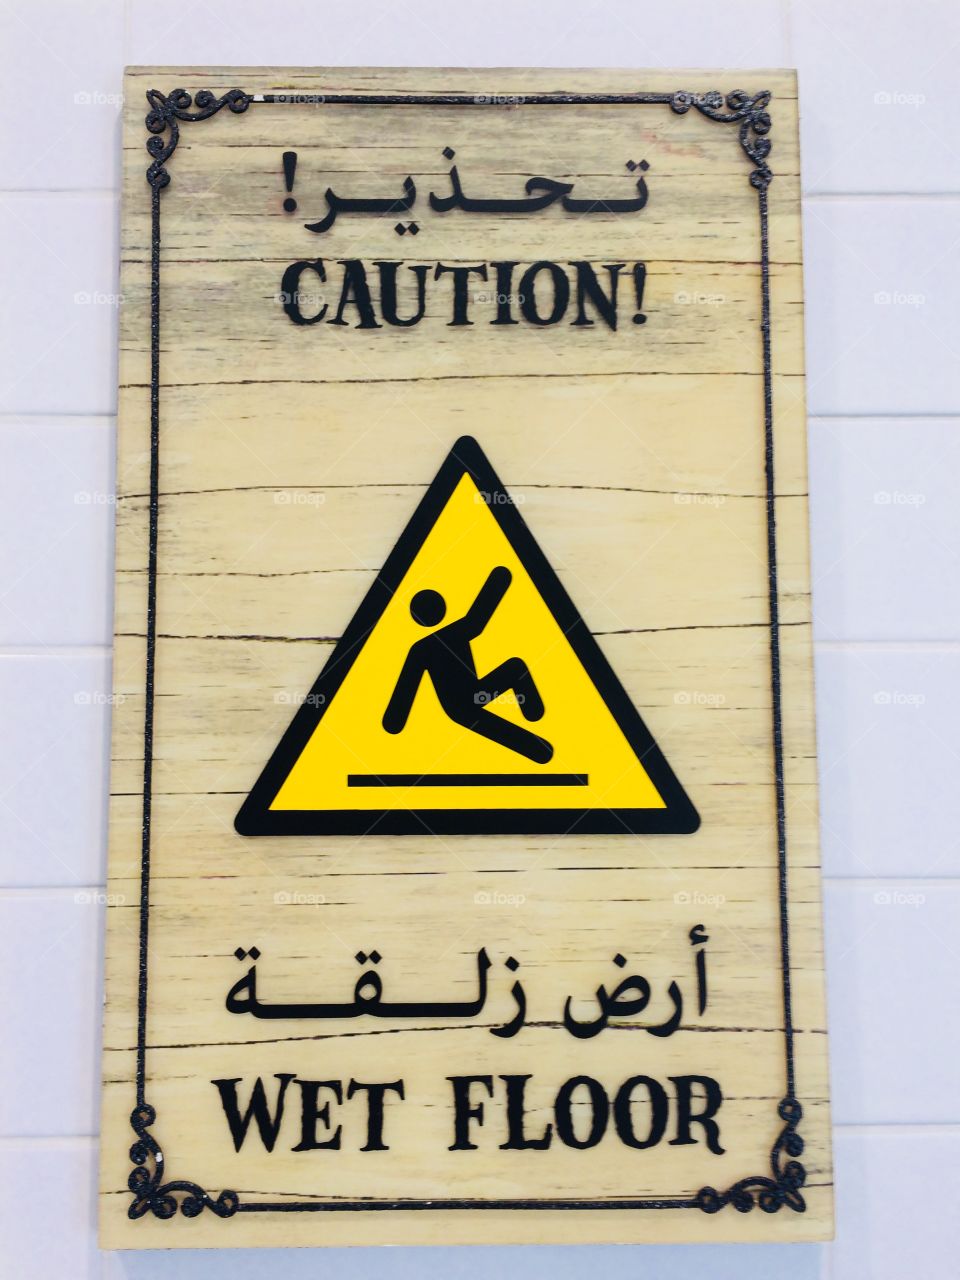 Warning in Middle East